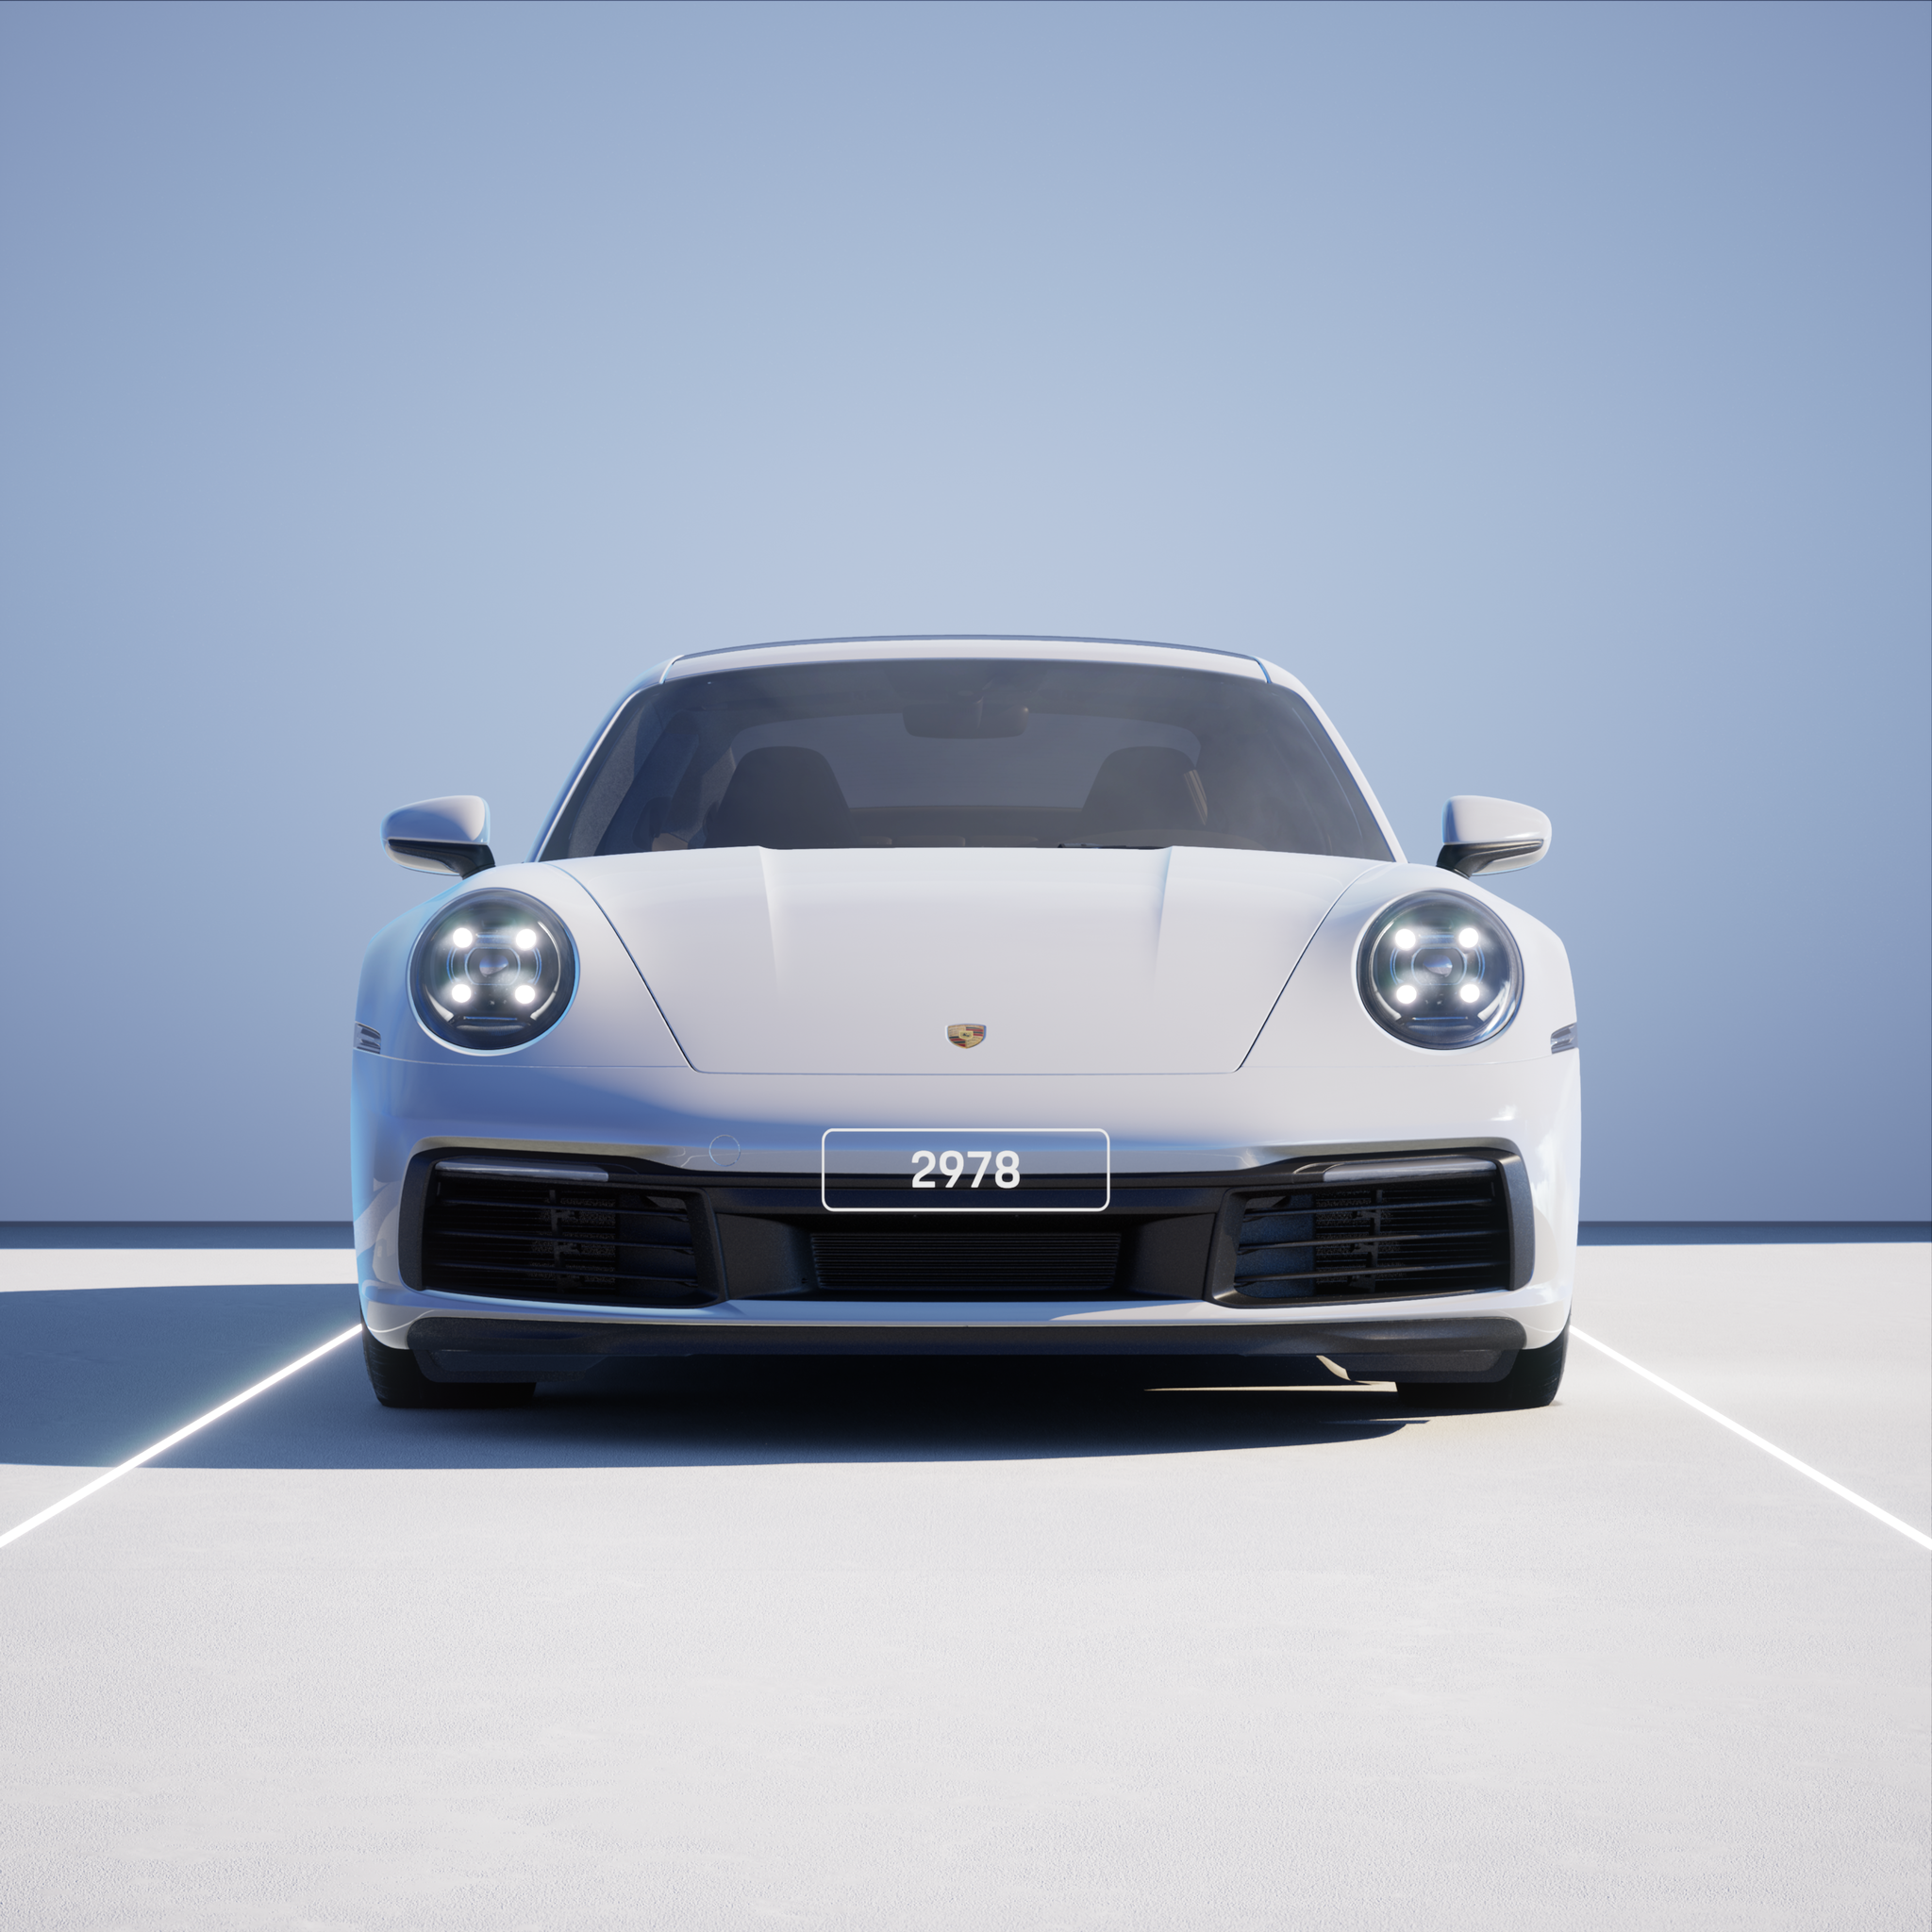 The PORSCHΞ 911 2978 image in phase